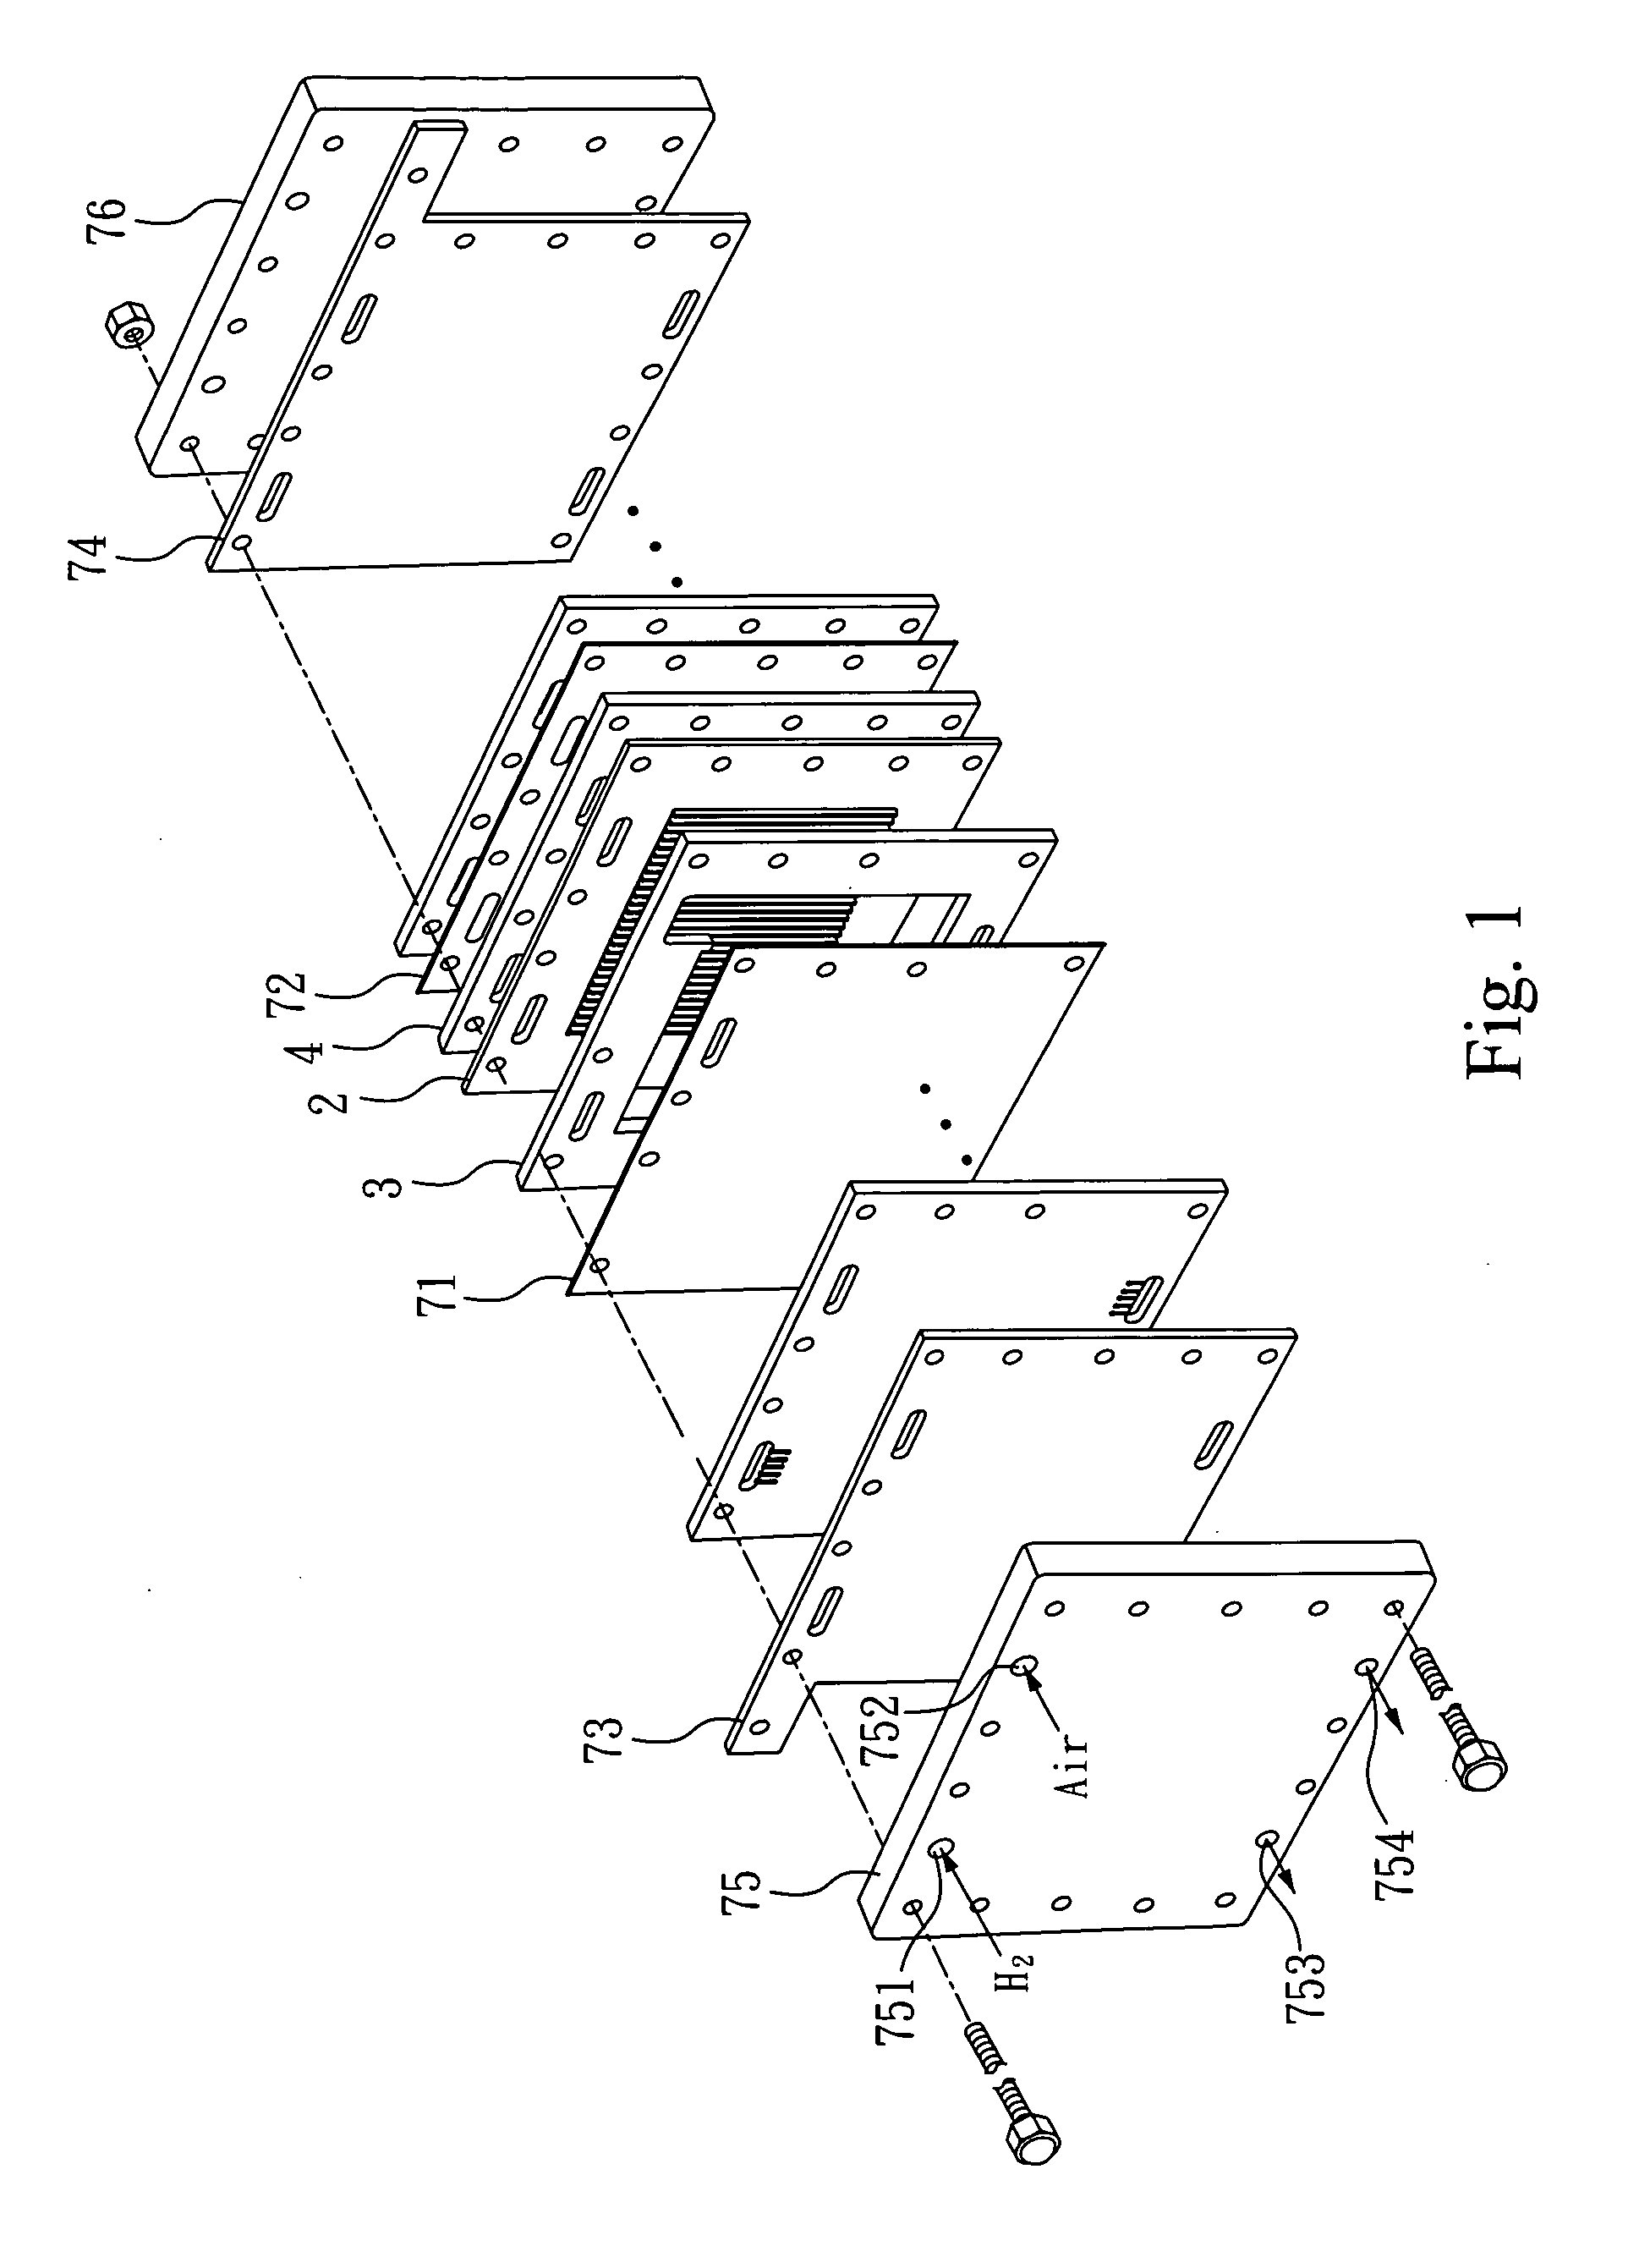 Flow field plate of a fuel cell with airflow guiding gaskets